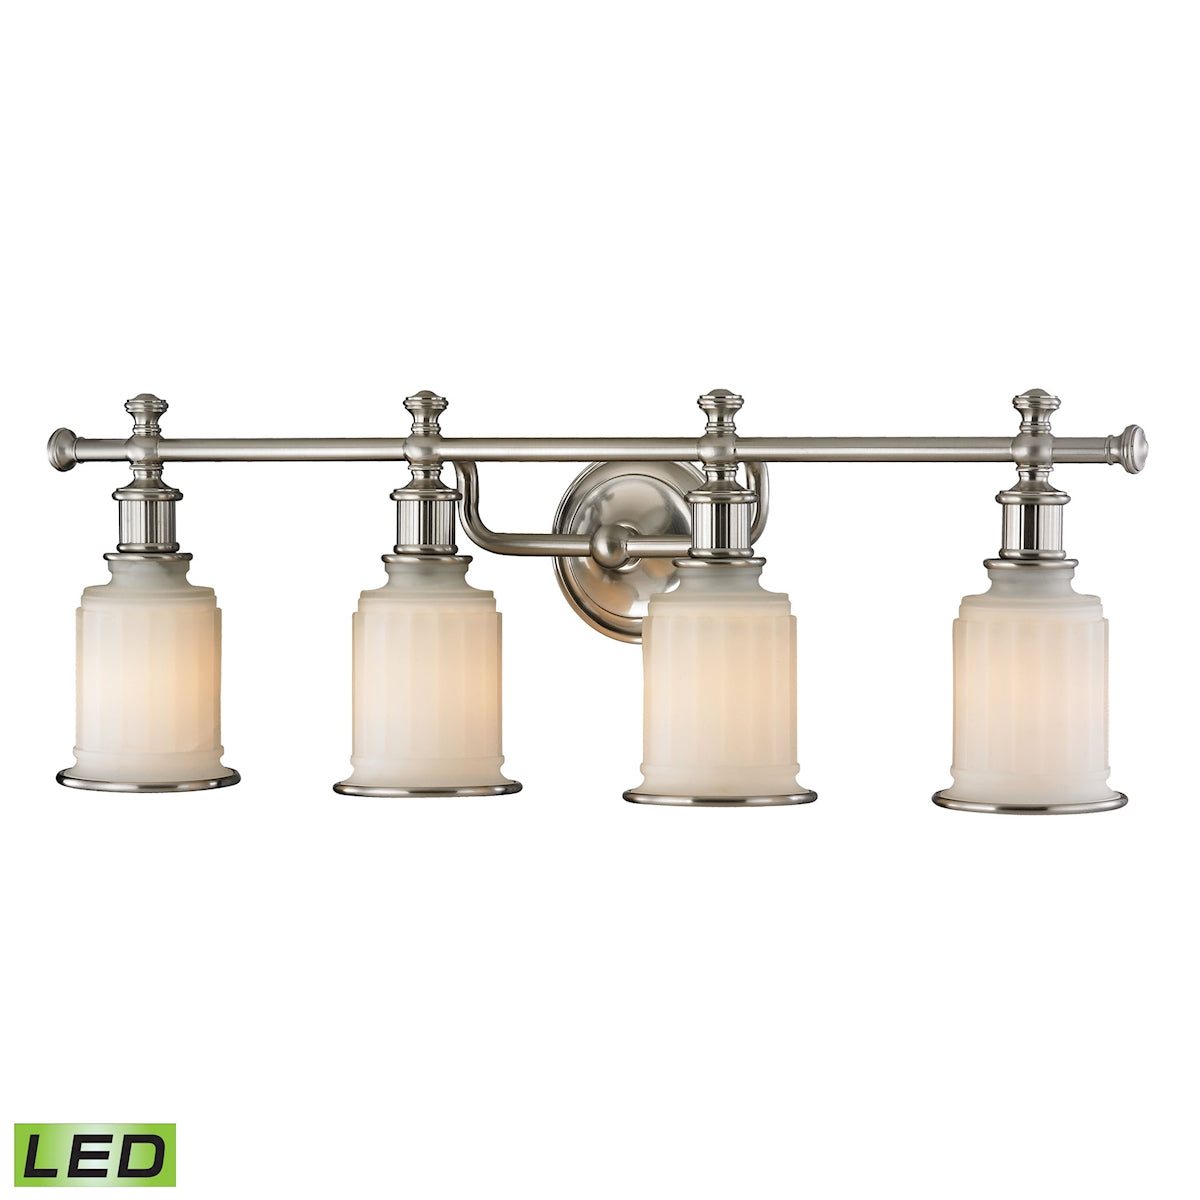 Acadia 4-Light Vanity Lamp in Brushed Nickel with Opal Reeded Pressed Glass - Includes LED Bulbs